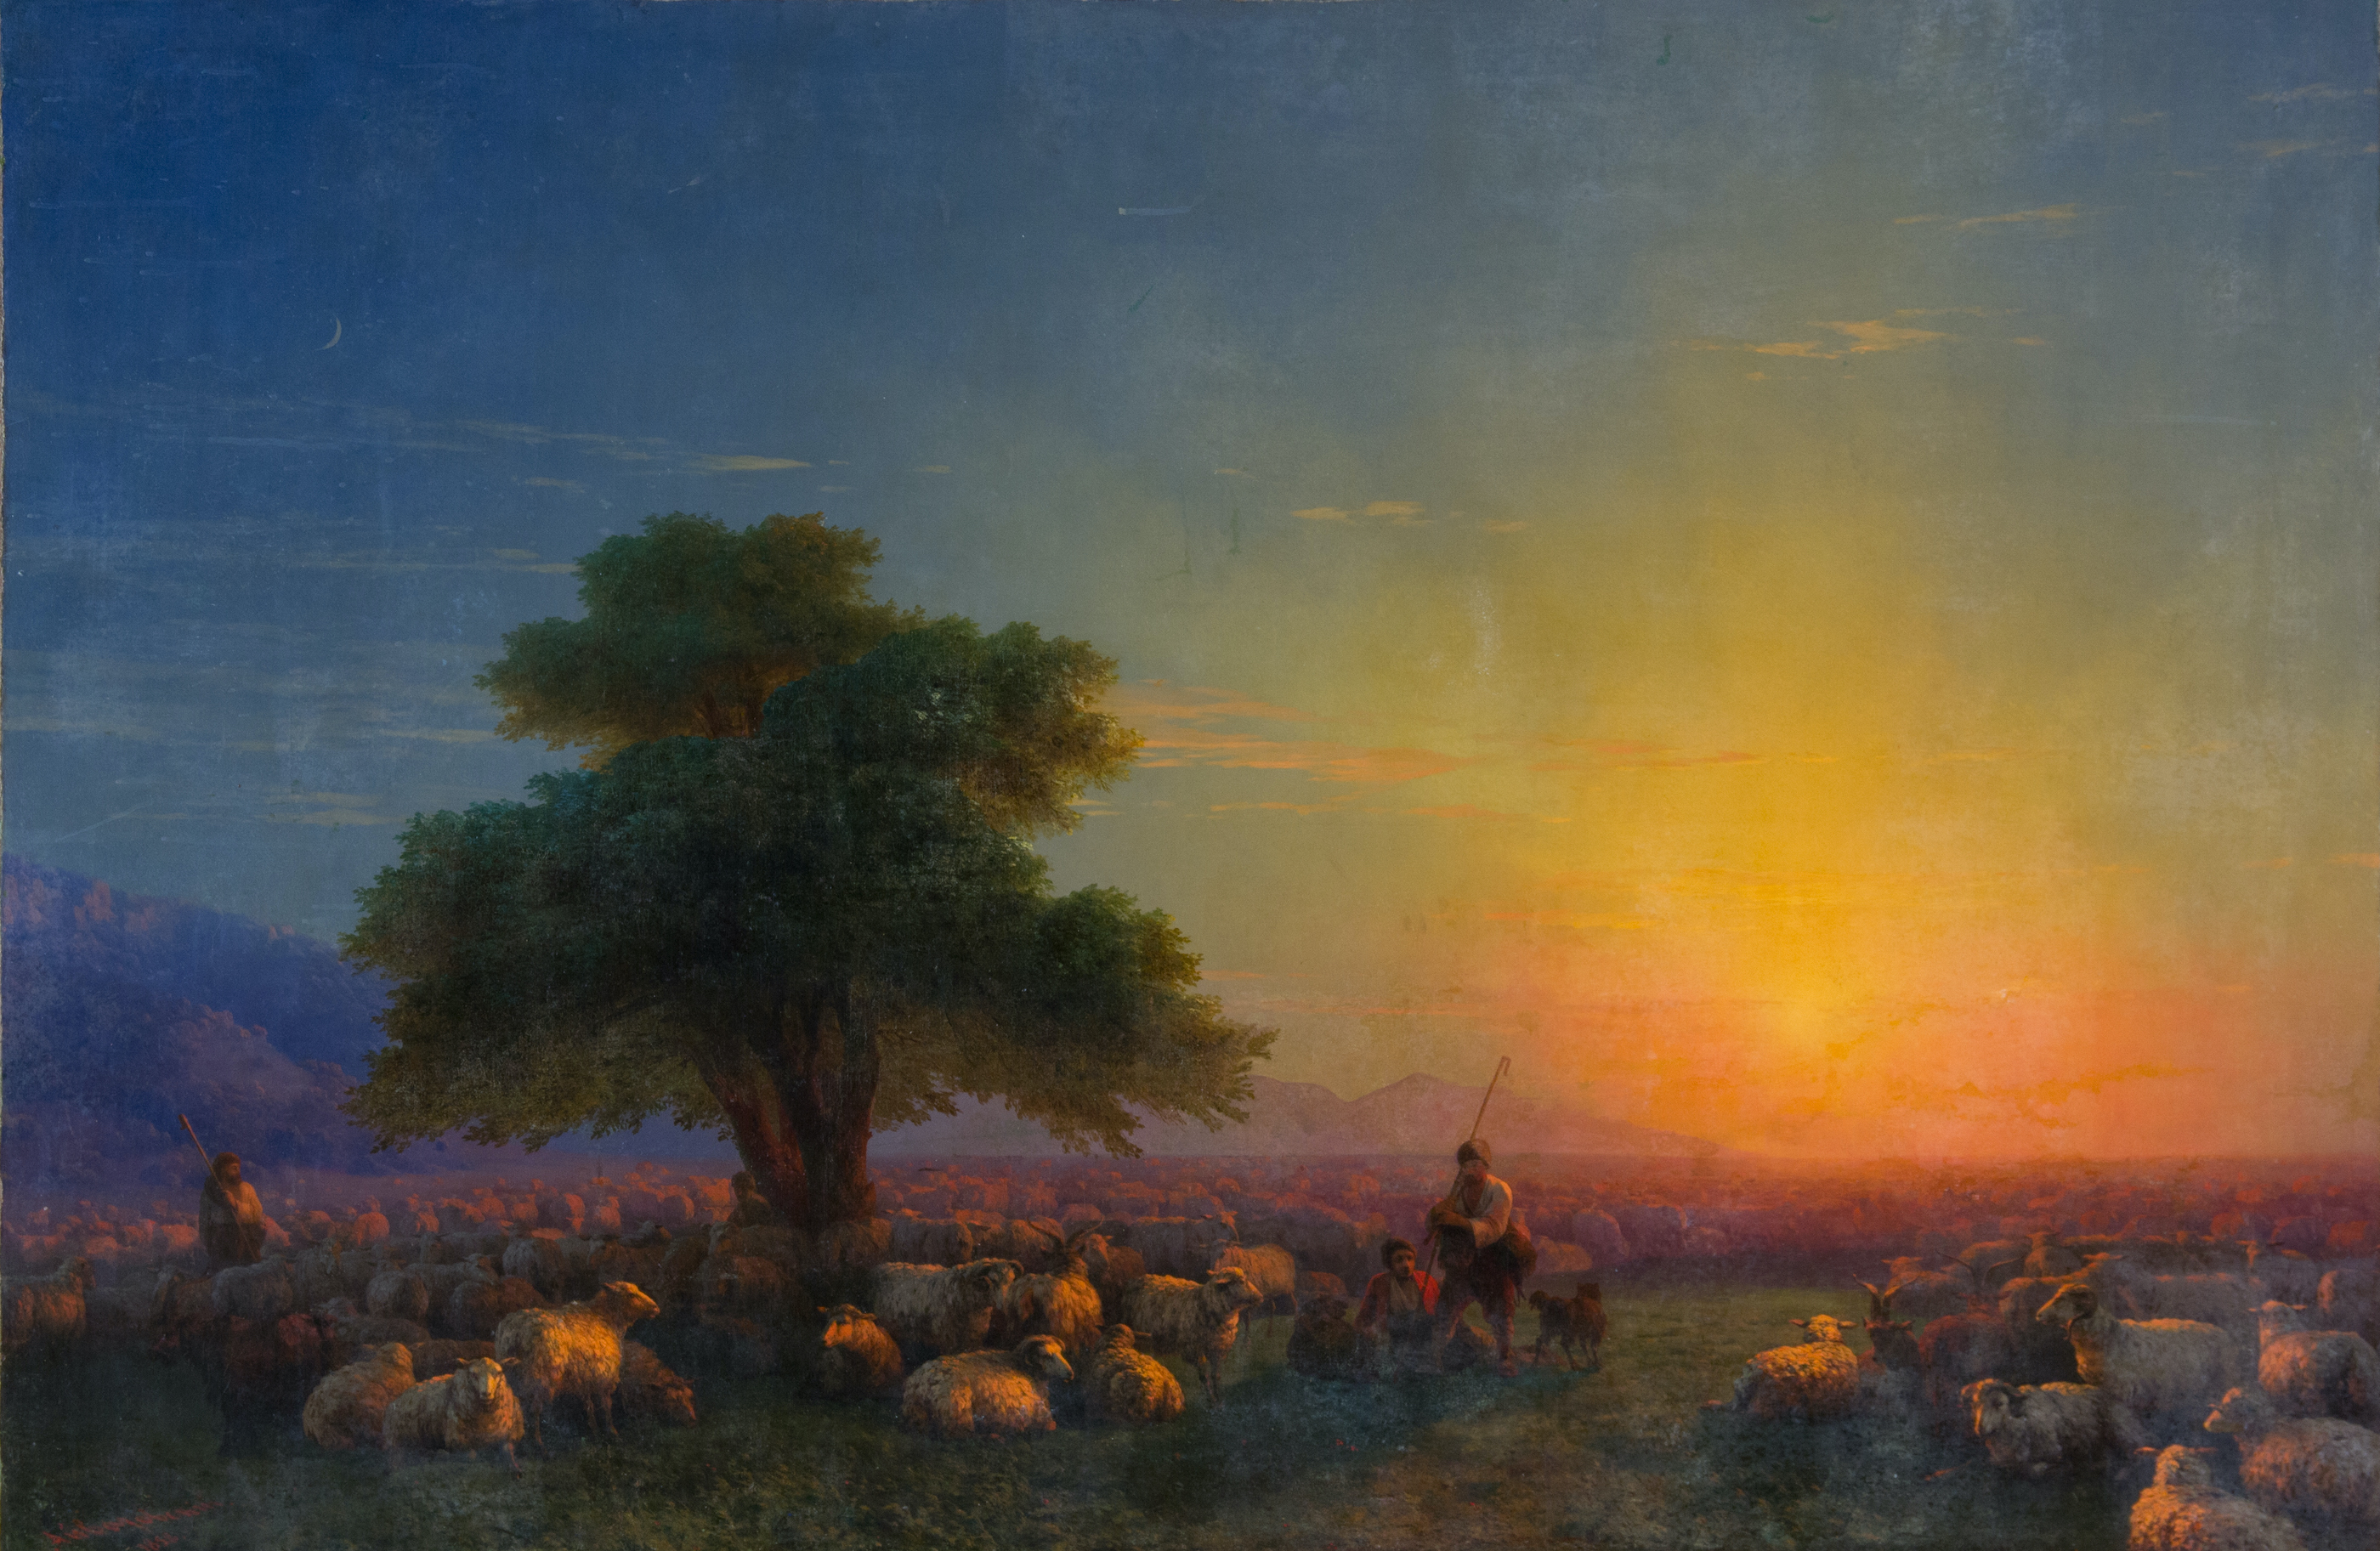 Sheep by Ivan Aivazovsky - 1858 - 108,6 х 122,5 cm The Omsk Regional Museum of The Fine Arts